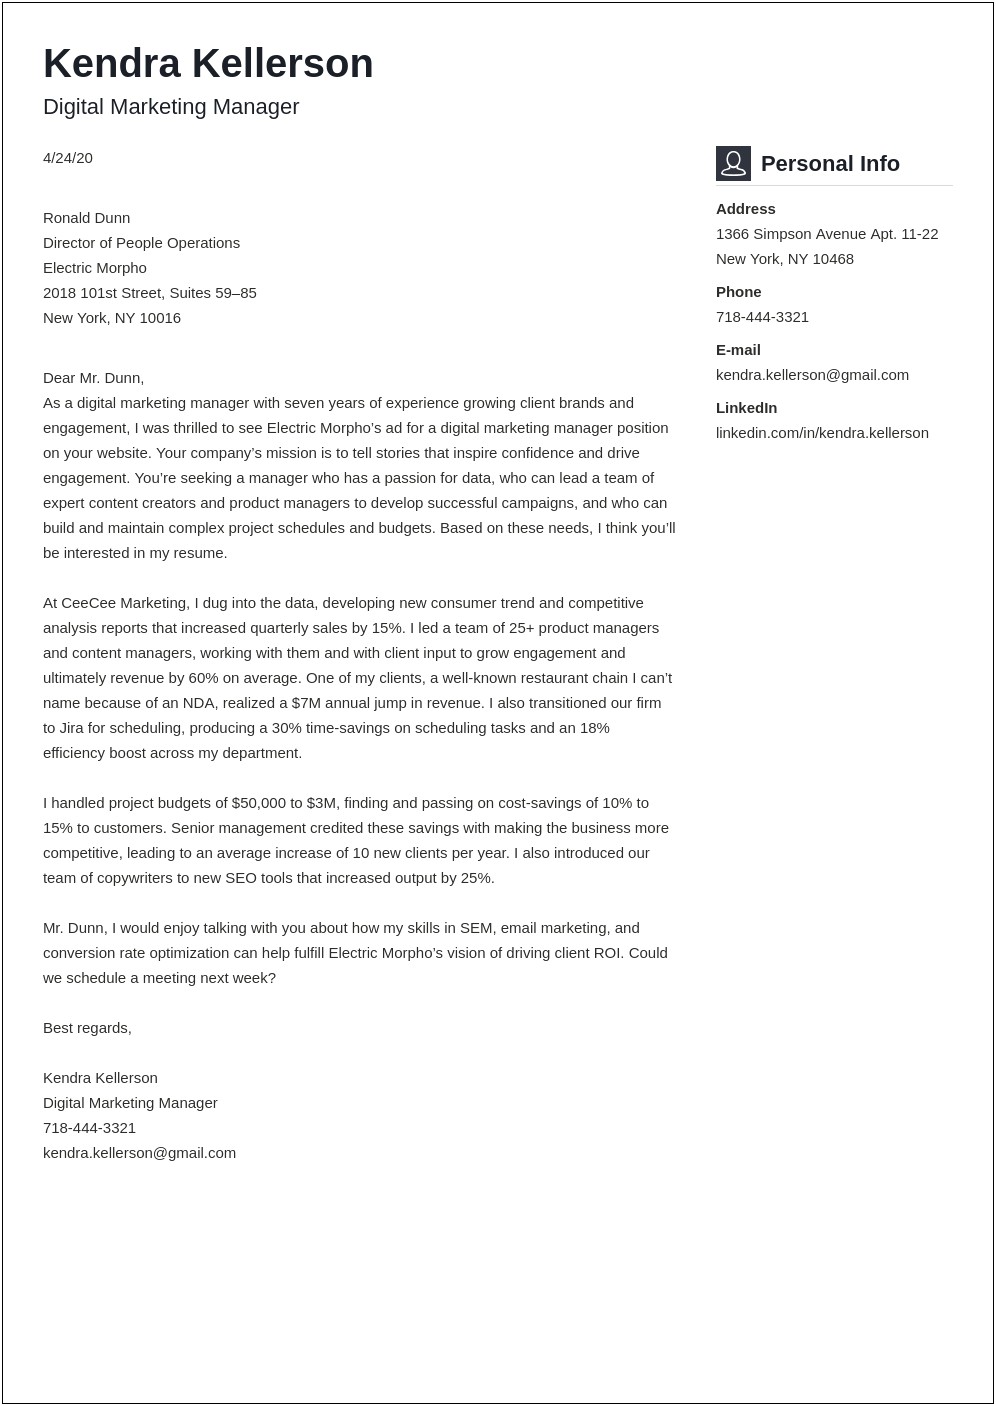 Pwc Including Cover Letter With Resume